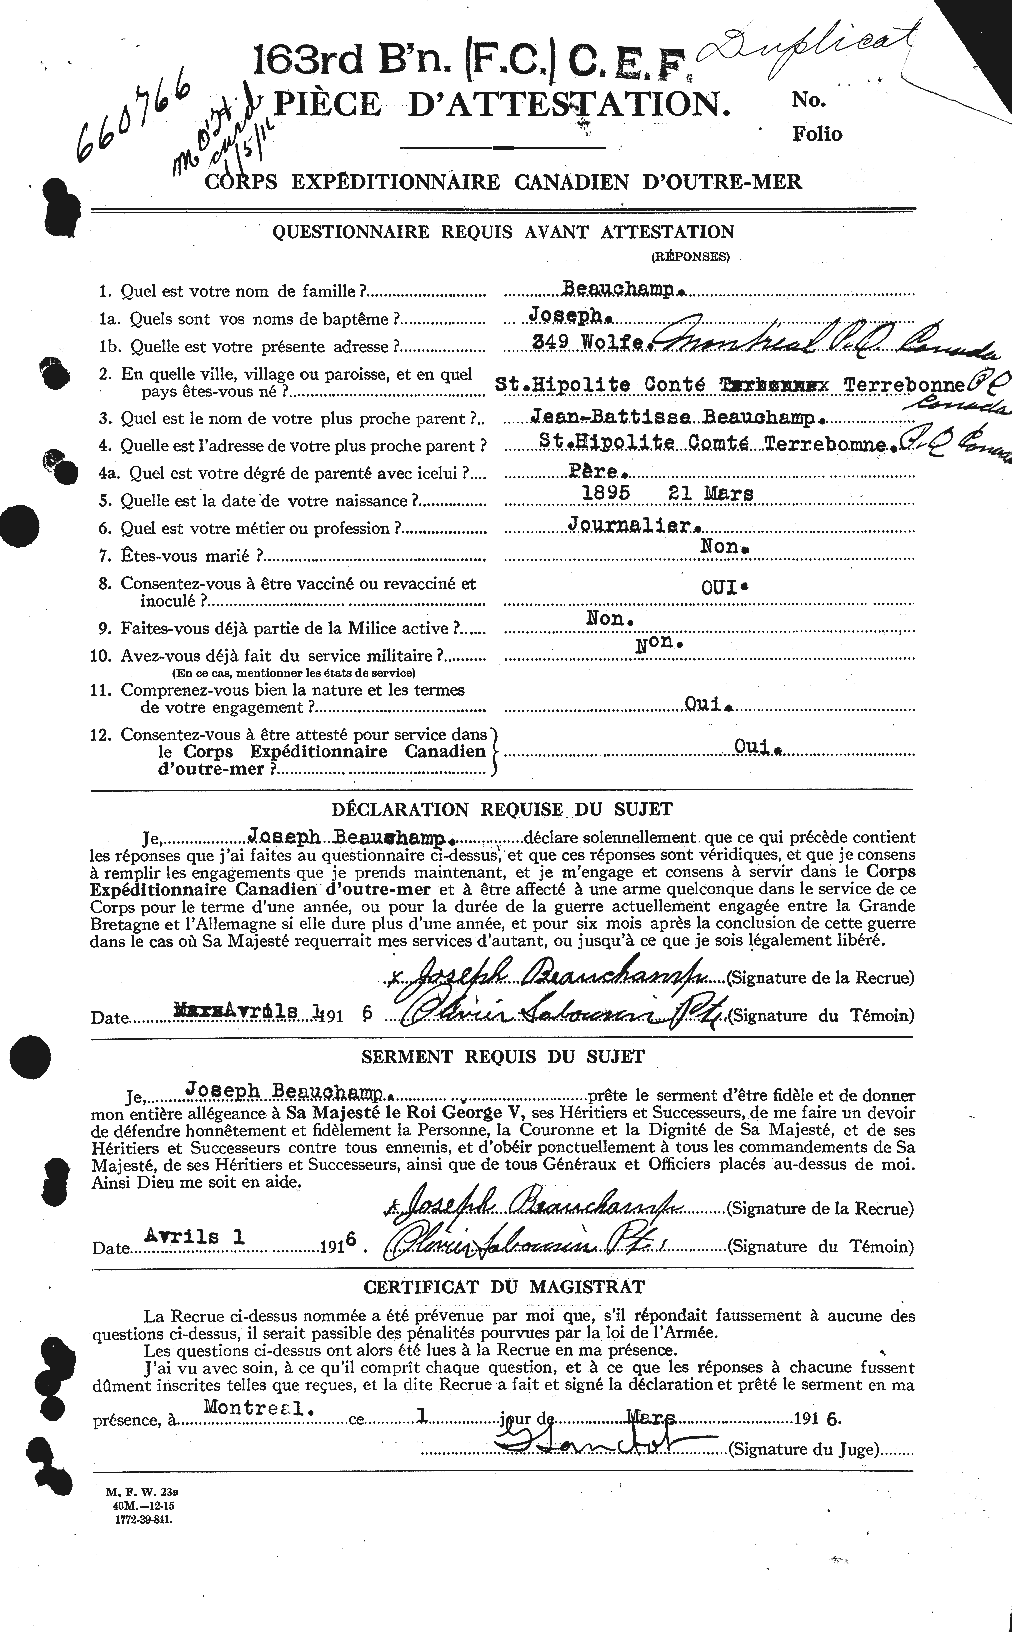 Personnel Records of the First World War - CEF 230988a